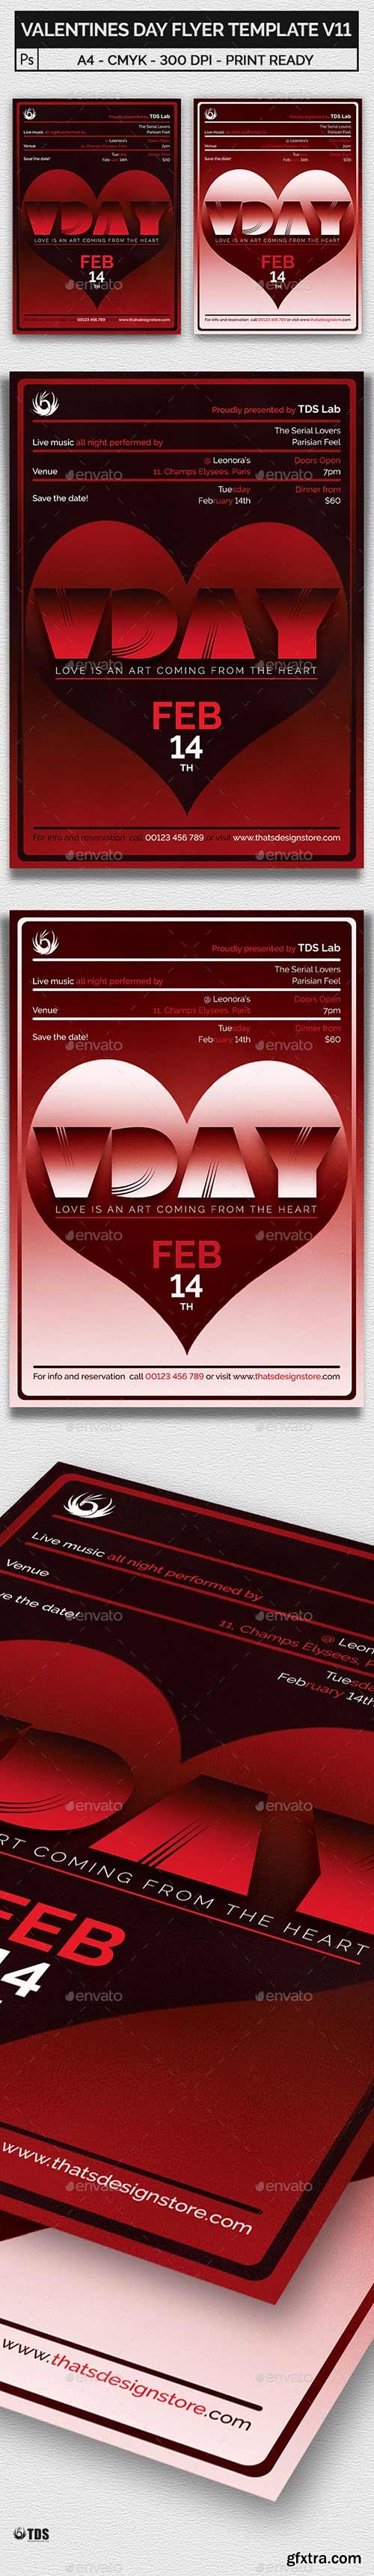 Graphicriver - Valentines Day Flyer Template V11 19319516